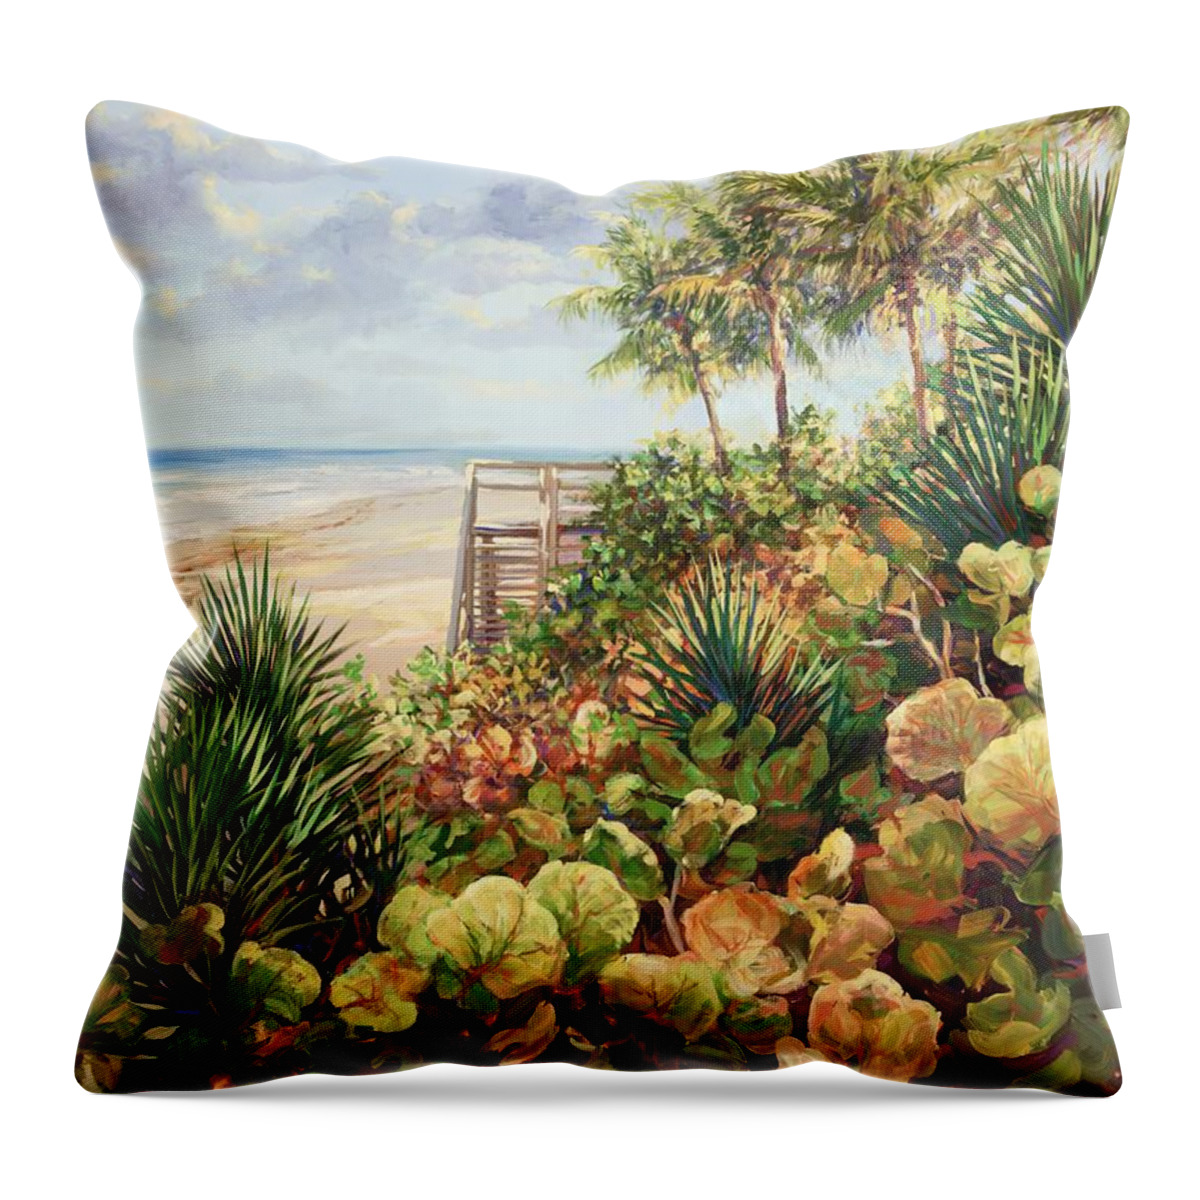 Beach Landscapes Throw Pillow featuring the painting Beachside Garden by Laurie Snow Hein